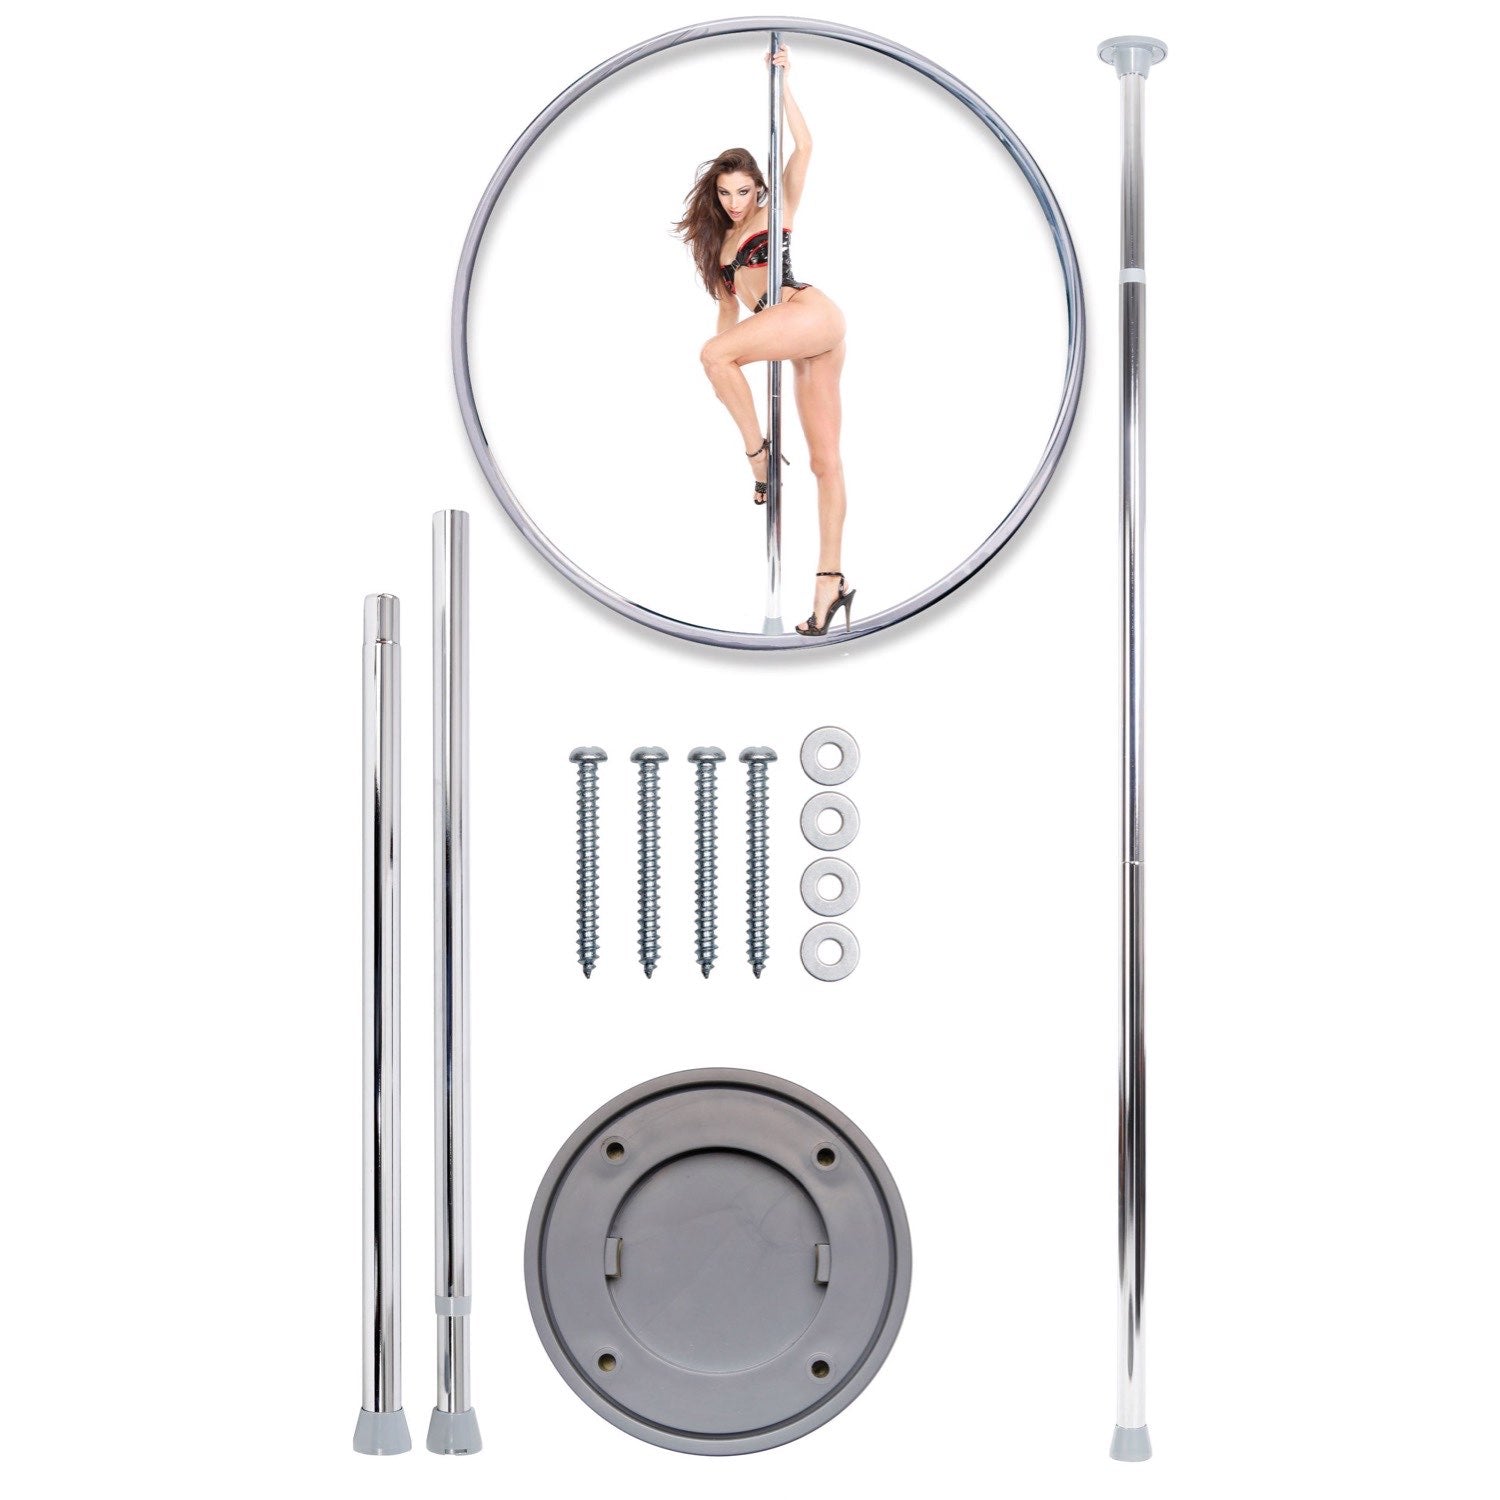 Fetish Fantasy Series fetish fantasy Series Fantasy Dance Pole - Metal Pole by Pipedream